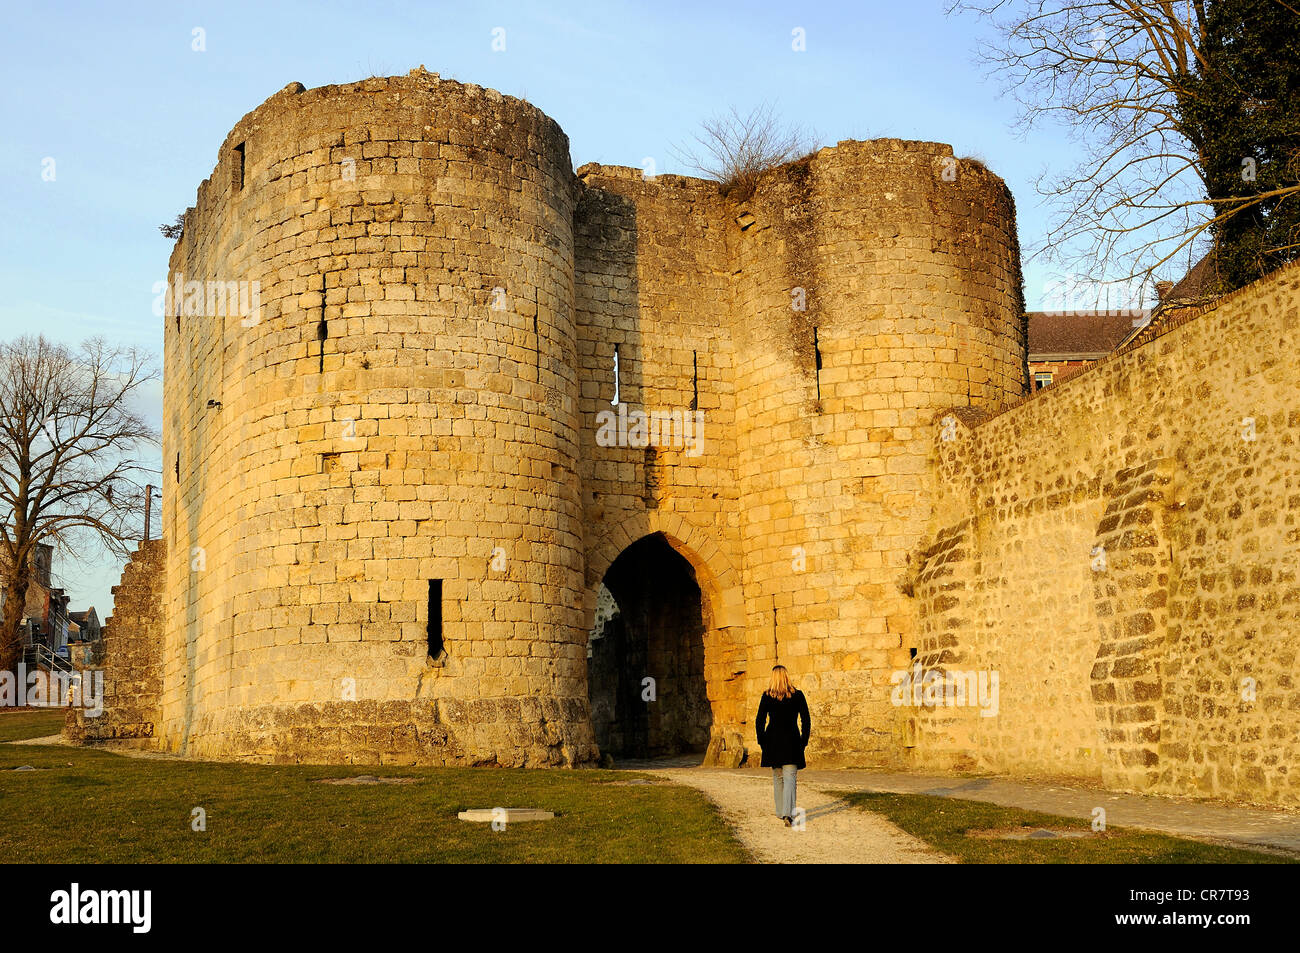 France, Aisne, Laon, Soissons gate of the medieval rampart Stock Photo